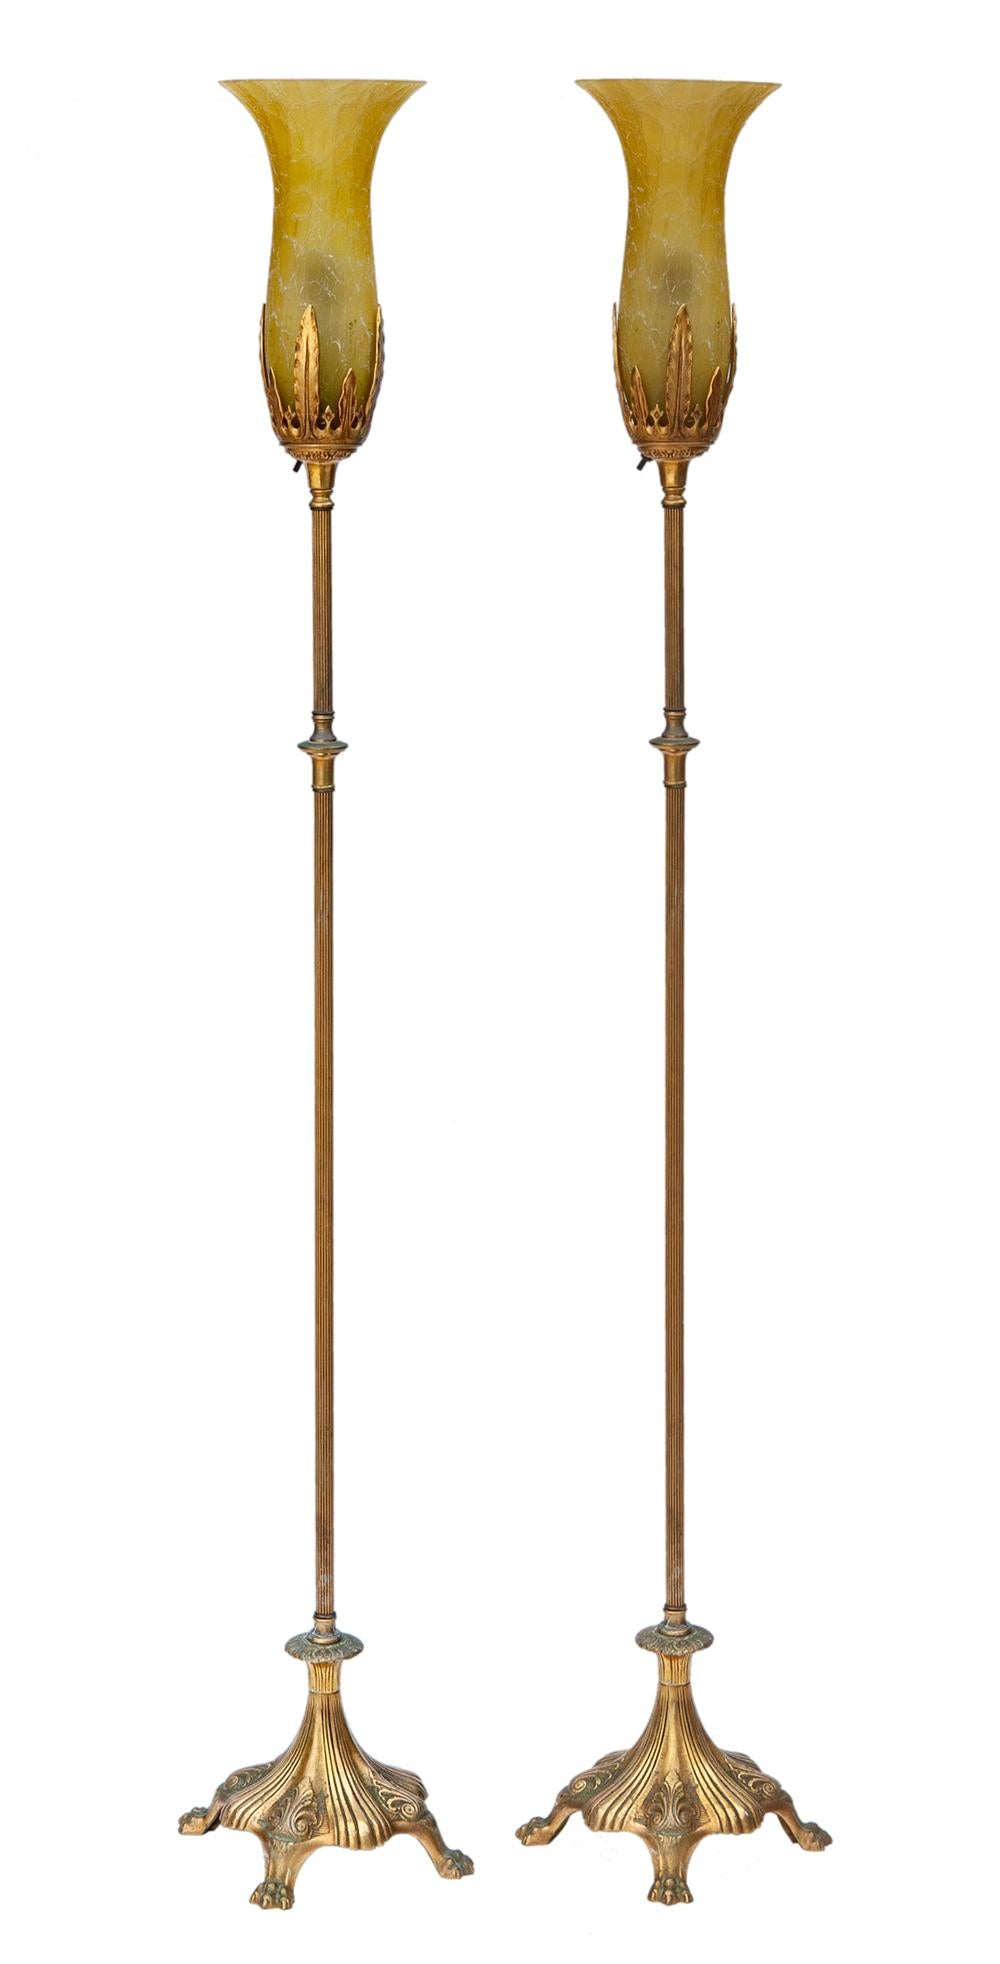 A pair of elegant 1920's brass, cast iron & bronze floor lamps, a pair.
Original period art glass shades are included.
One of the shades has been professionally repaired.
Recently re-wired, with silk cords.
